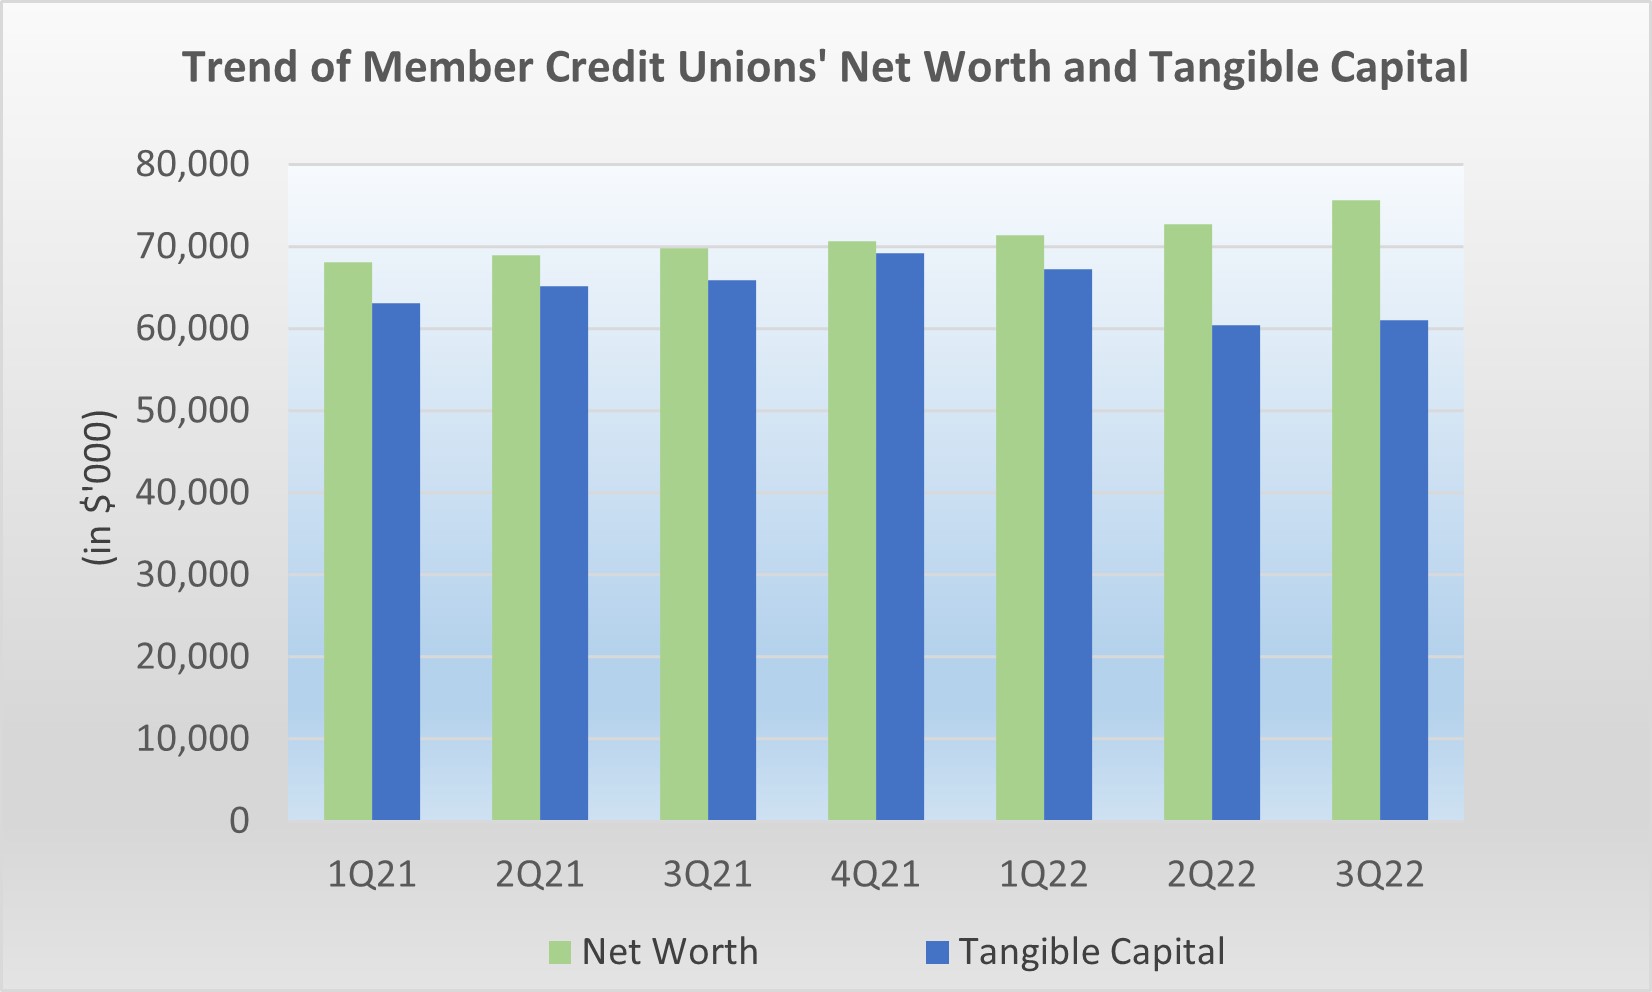 Chart showing Trend of Credit Unions' Net Worth and Tangible Capital